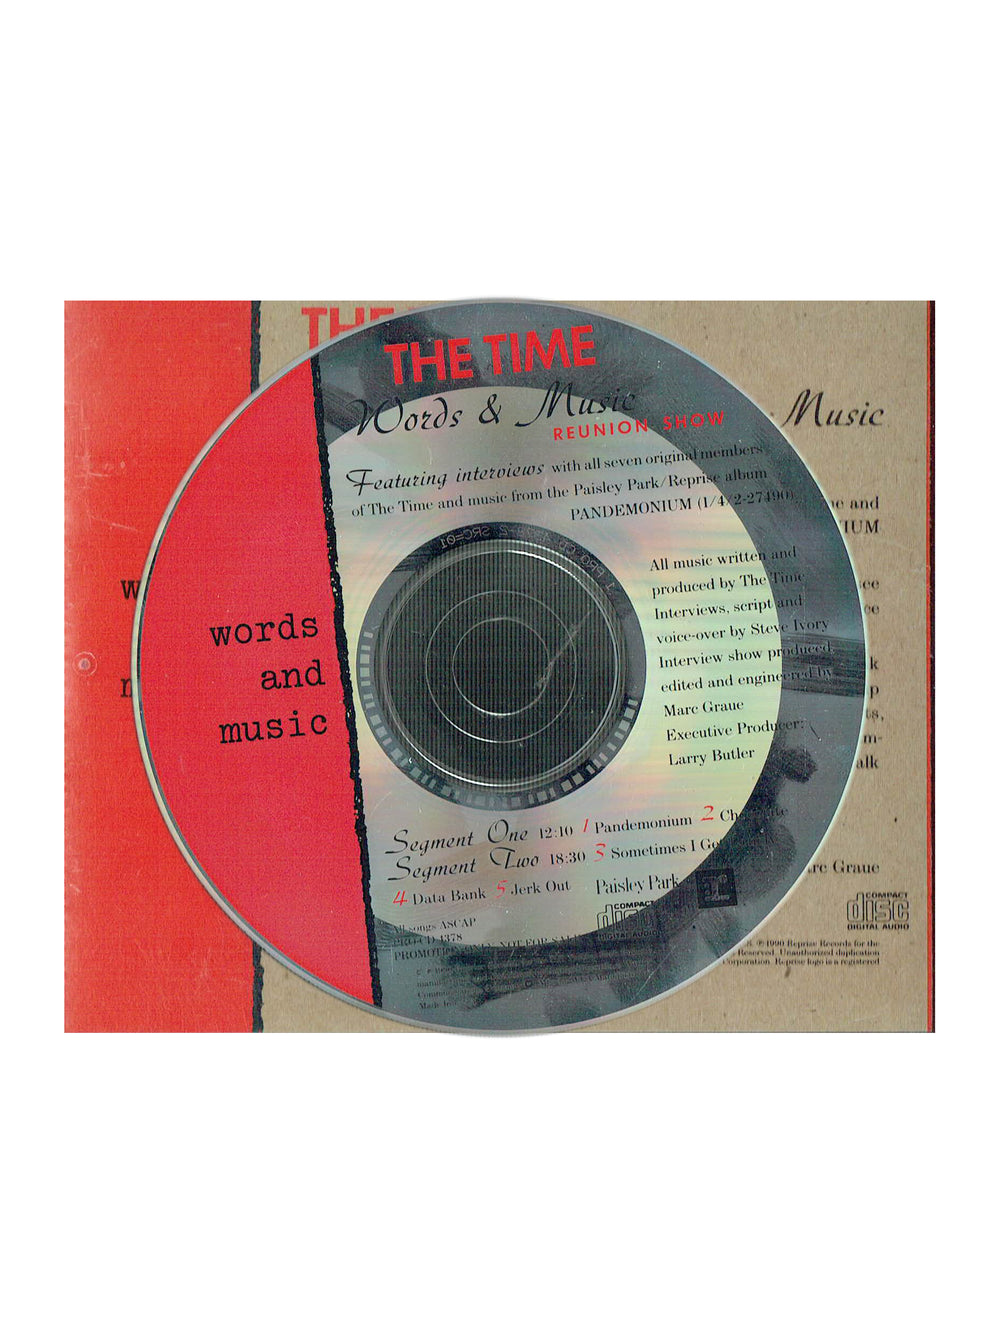 Prince – The Time Words & Music Reunion Show Promotional CD Album Prince SW